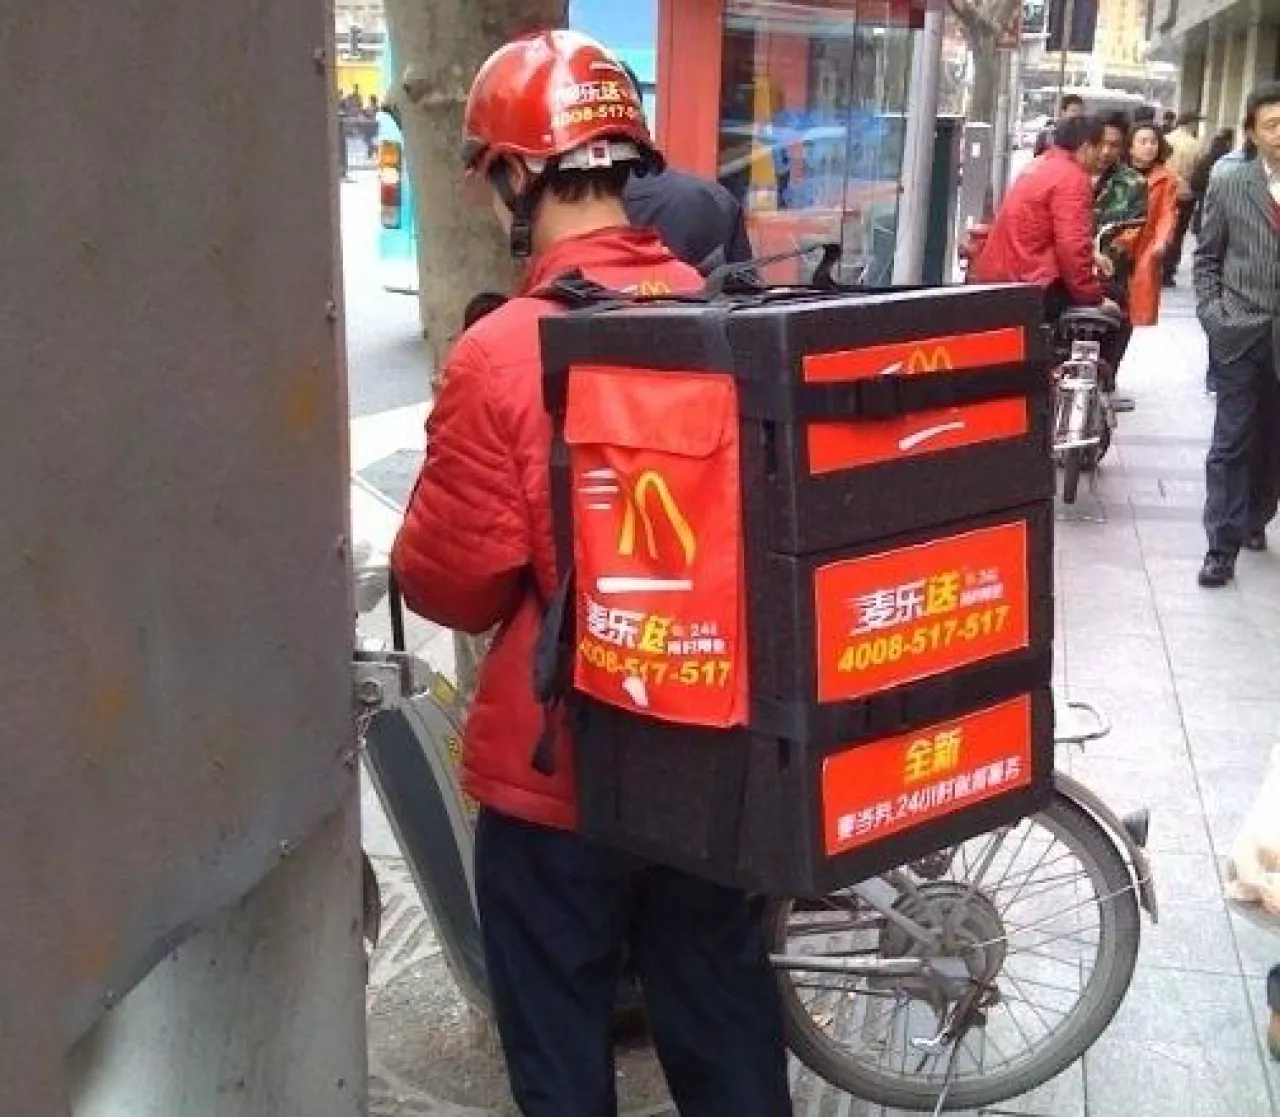 Kurier McDonald‘s w Szanghaju (By Christopher from Shanghai, China (McDelivery Your Way) [CC BY 2.0 (http://creativecommons.org/licenses/by/2.0)], via Wikimedi)